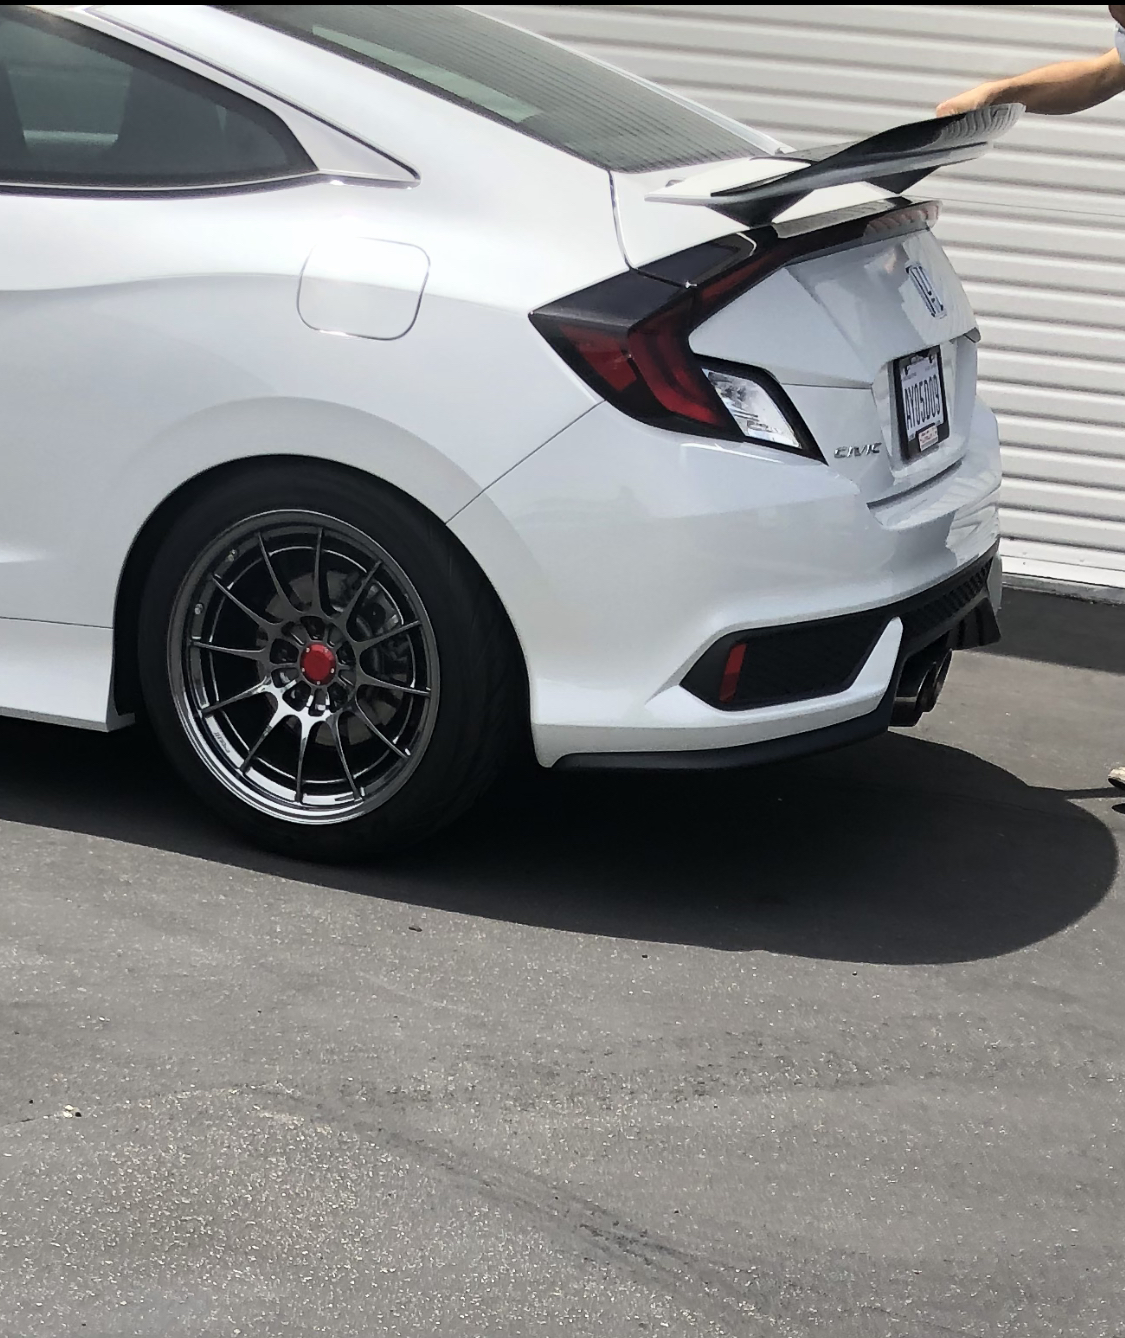 Honda Civic 10th gen What's your SI looking like today? DEC61FA0-05E7-478A-A74E-7C1D6768FE9A